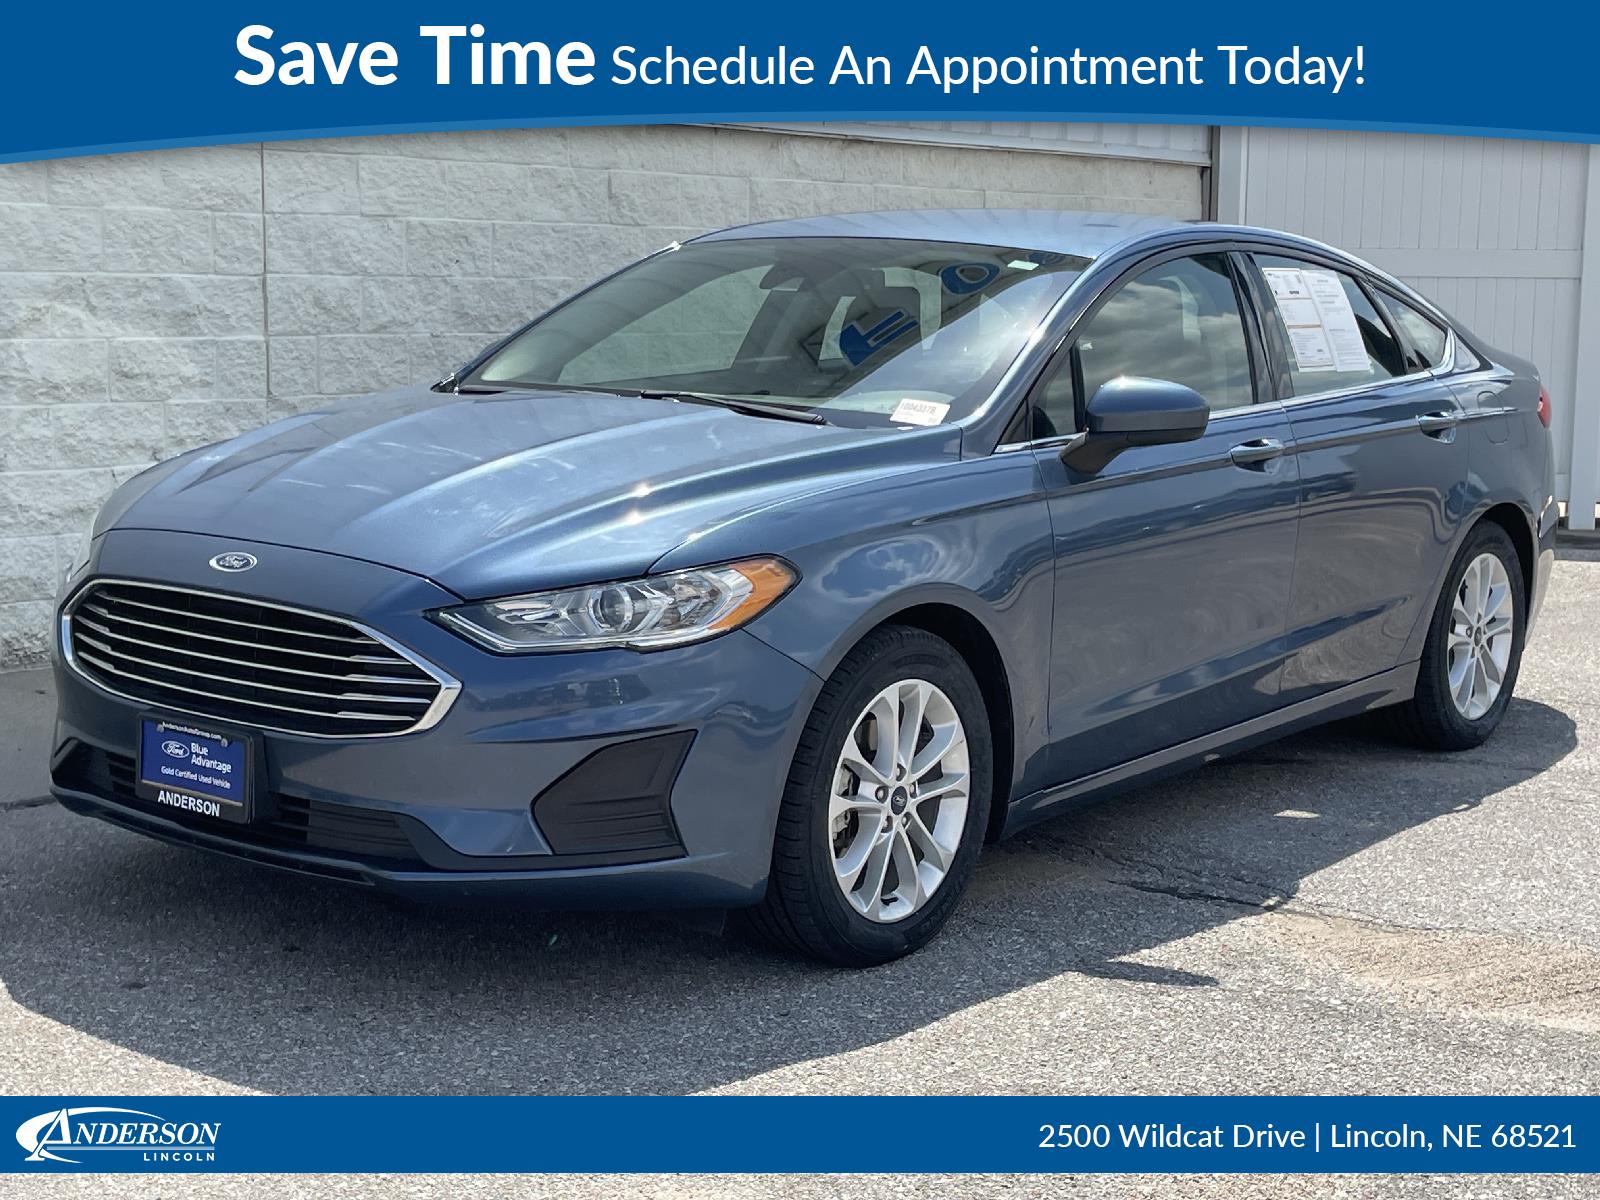 Used 2019 Ford Fusion SE Stock: 1004337B